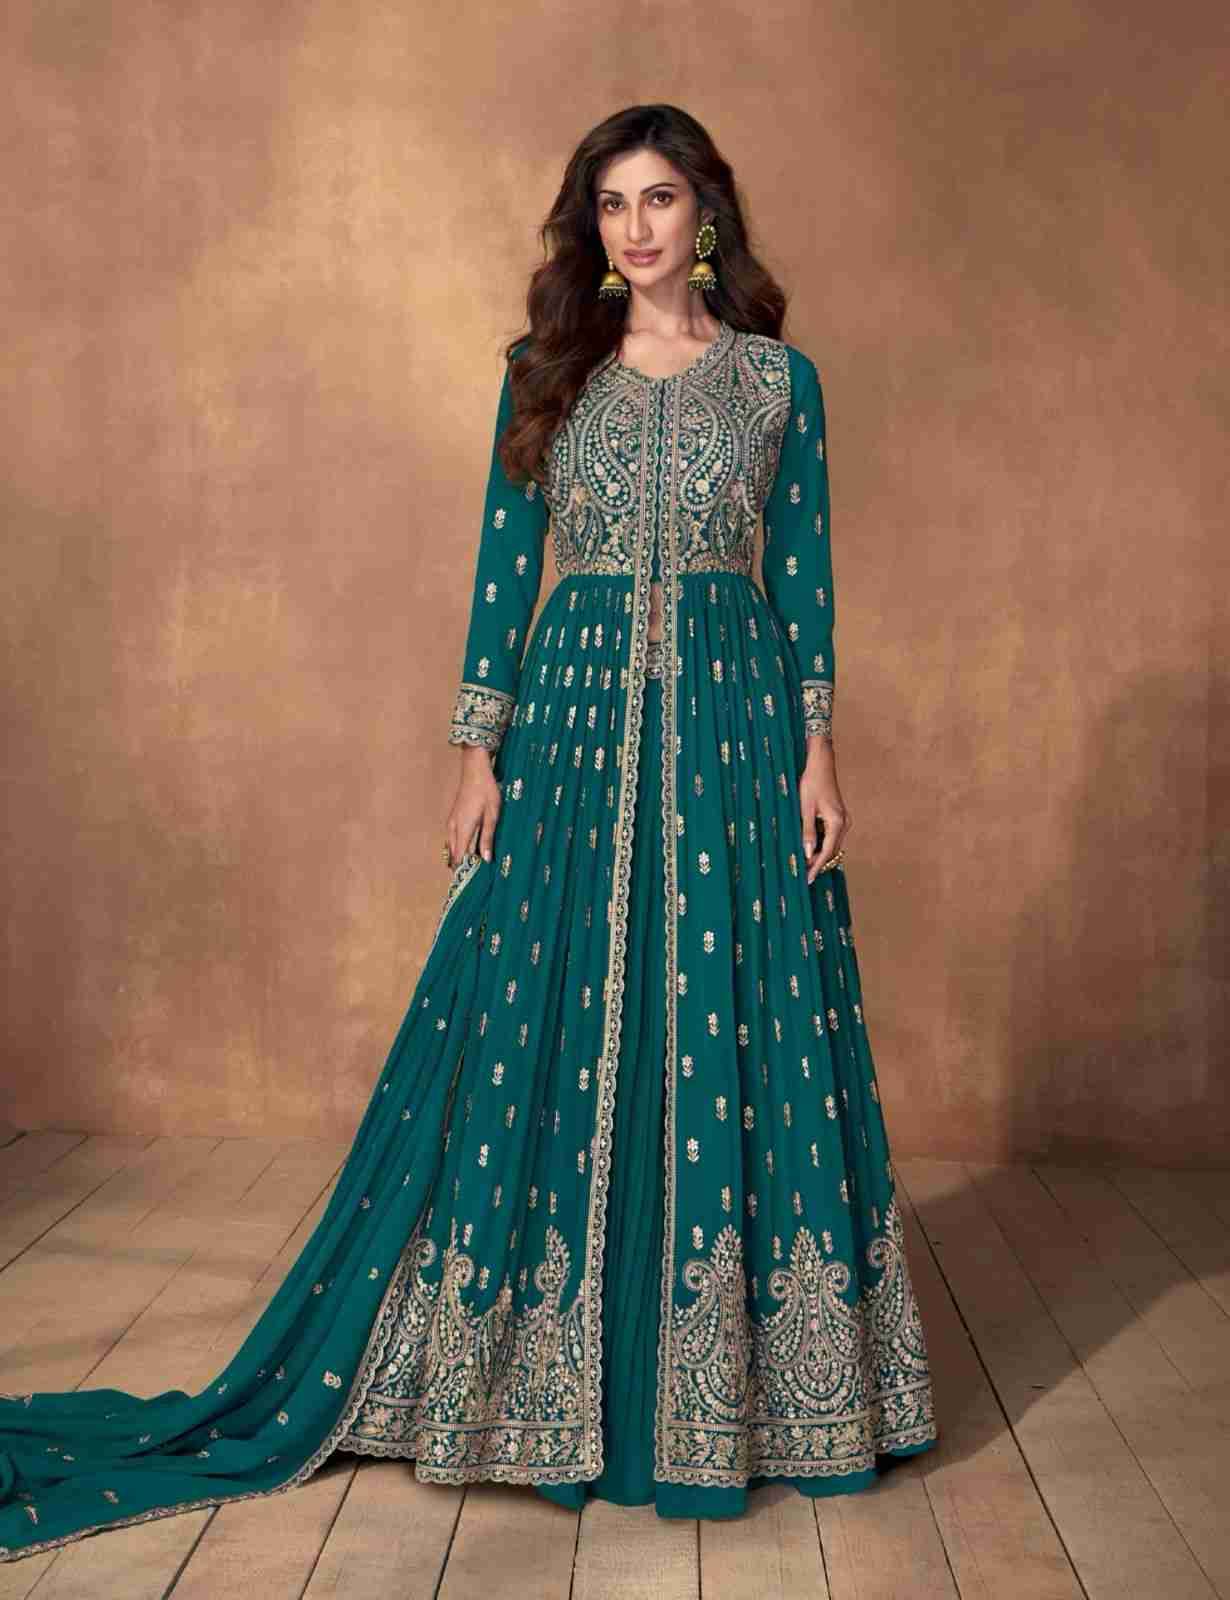 Madhubala By Aashirwad Creation 9848 To 9852 Series Beautiful Stylish Festive Suits Fancy Colorful Casual Wear & Ethnic Wear & Ready To Wear Georgette Dresses At Wholesale Price